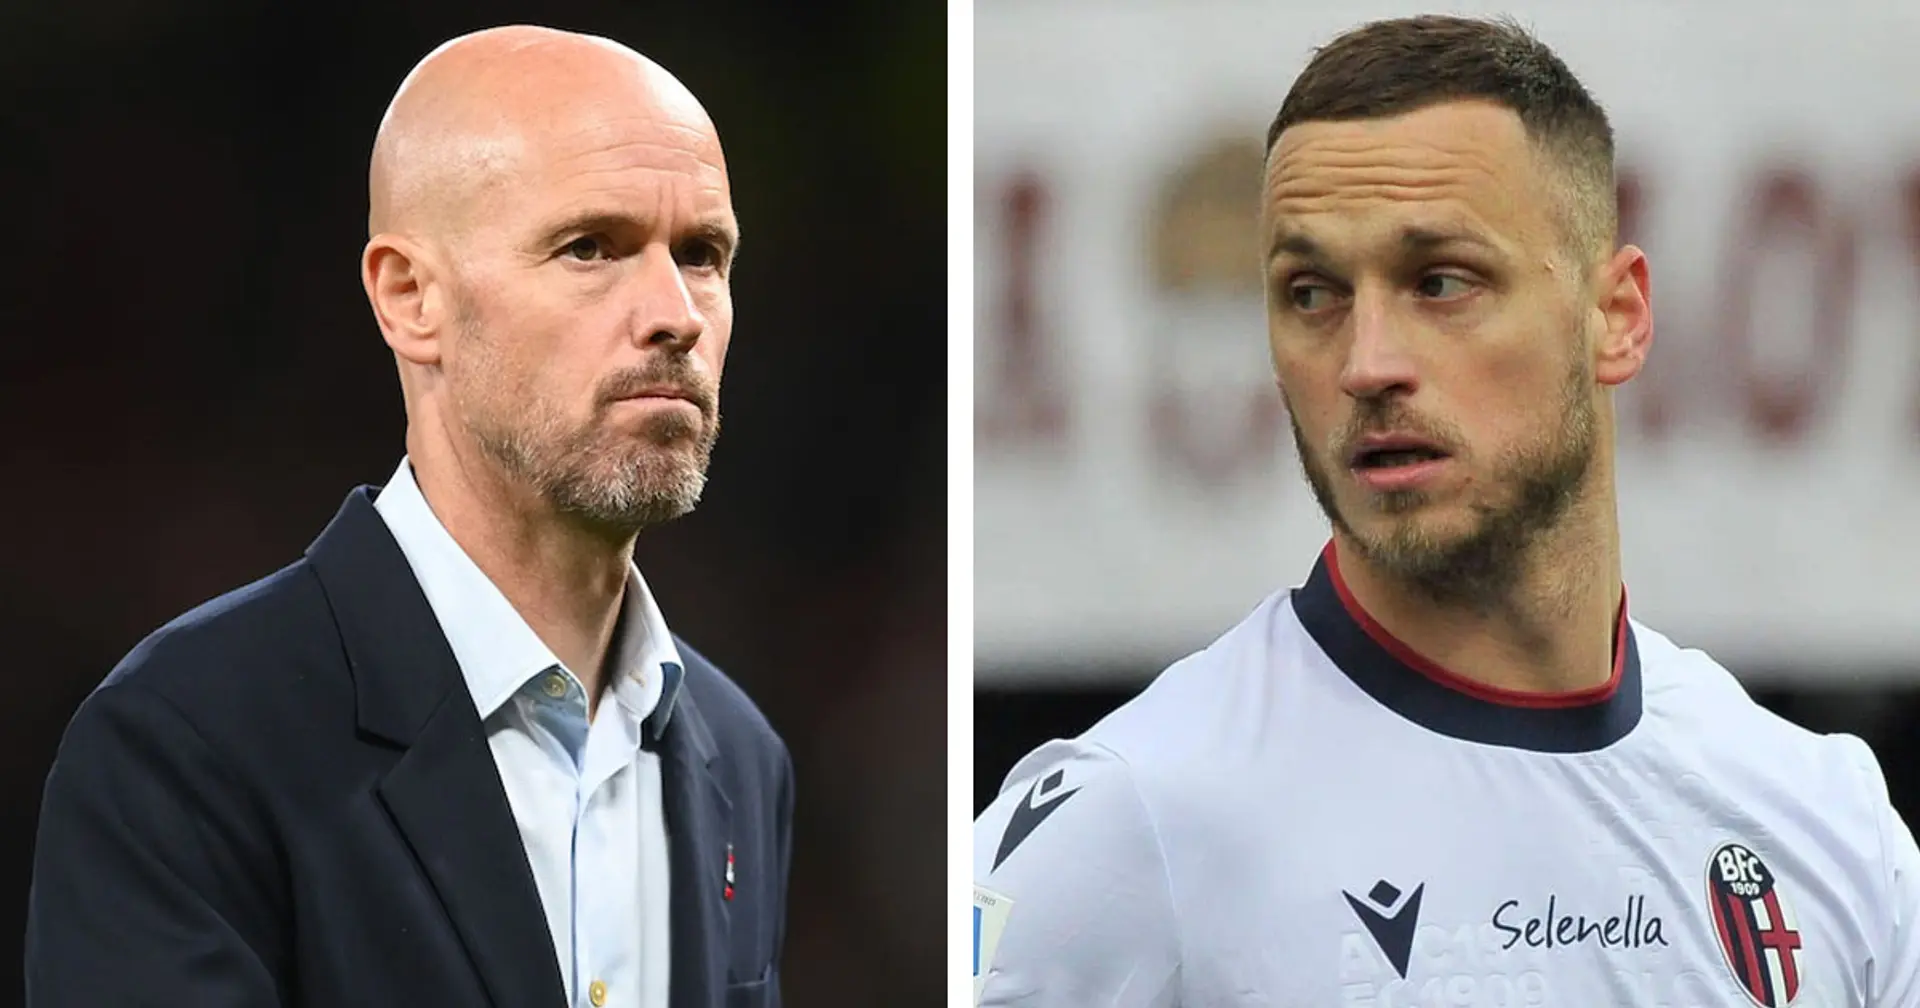 Bologna director confirms Arnautovic rejected United approach in summer - it wasn't due to fan backlash